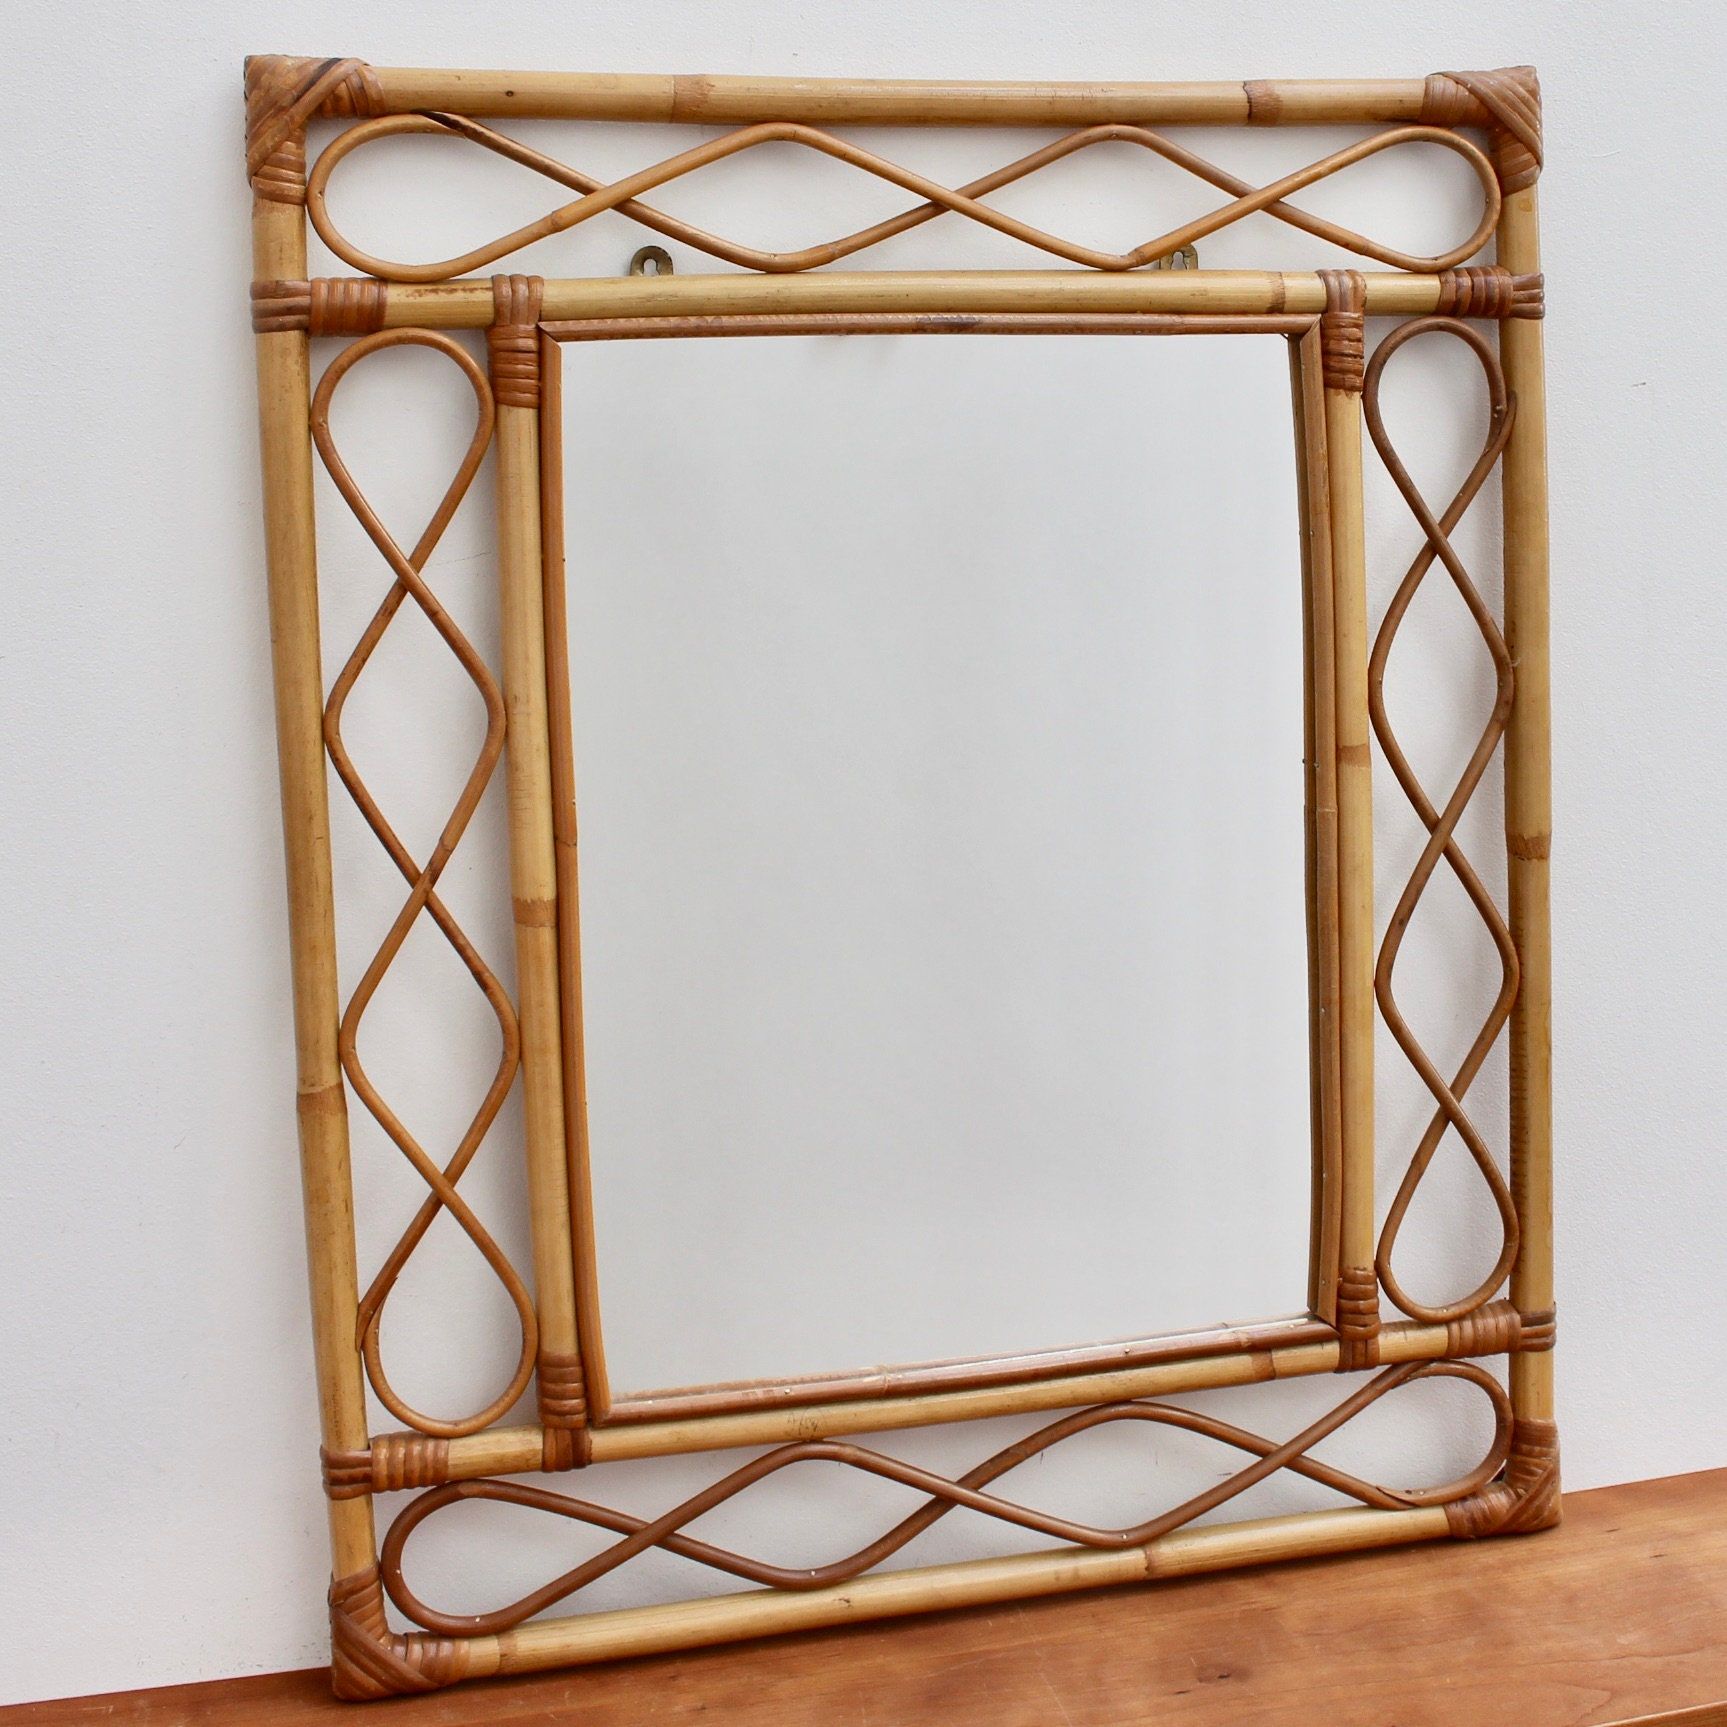 Rectangular French Rattan Wall Mirror Circa 1960s | Etsy Intended For Rectangular Bamboo Wall Mirrors (Photo 1 of 15)